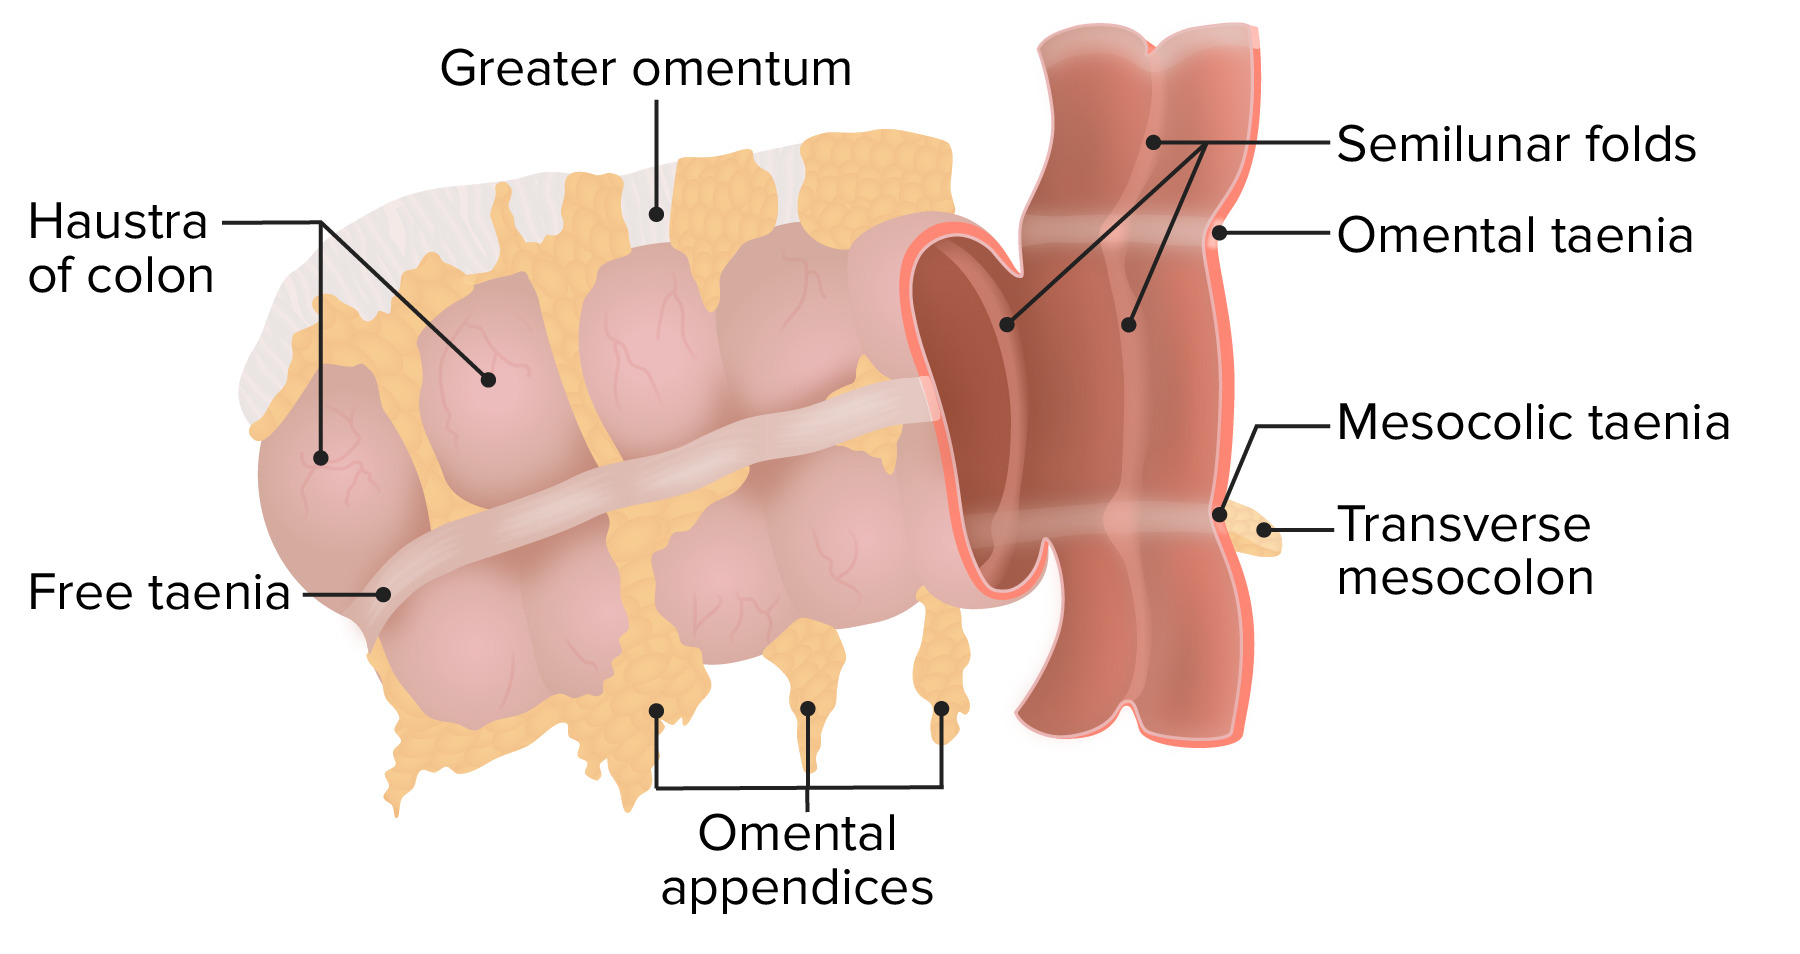 Large intestine with labels for the appendix, cecum, ascending